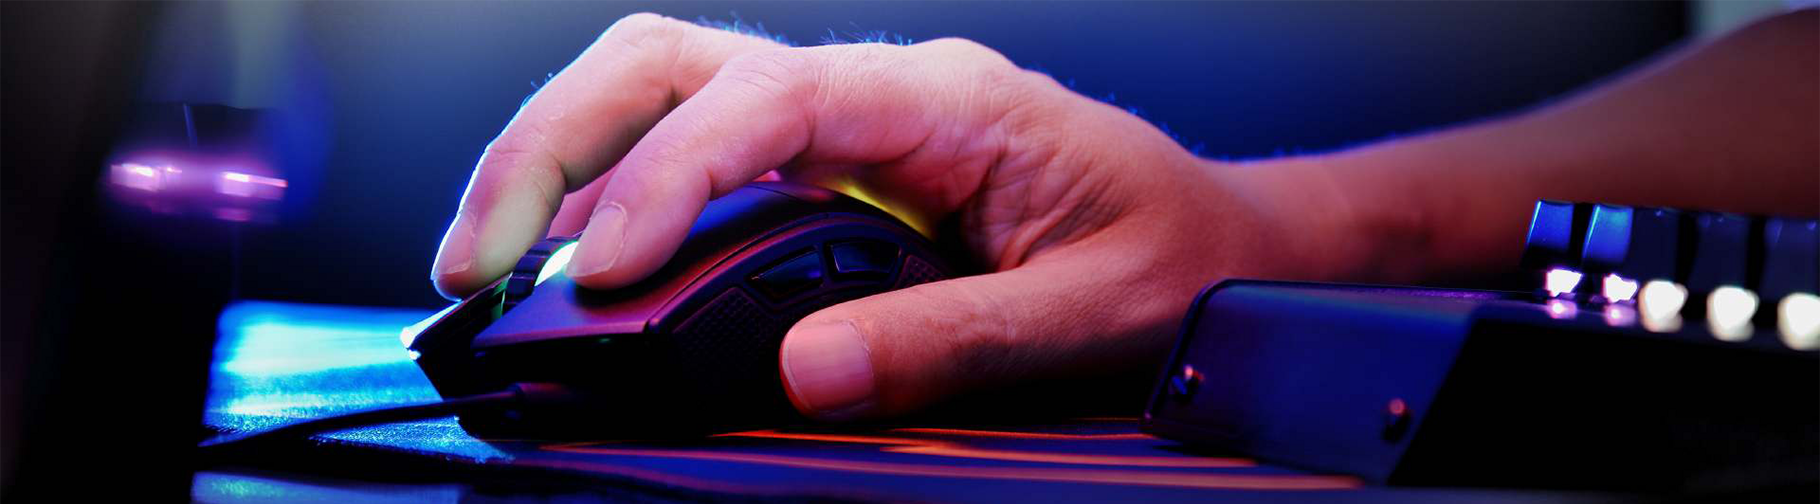 A gamer's hand holding a mouse